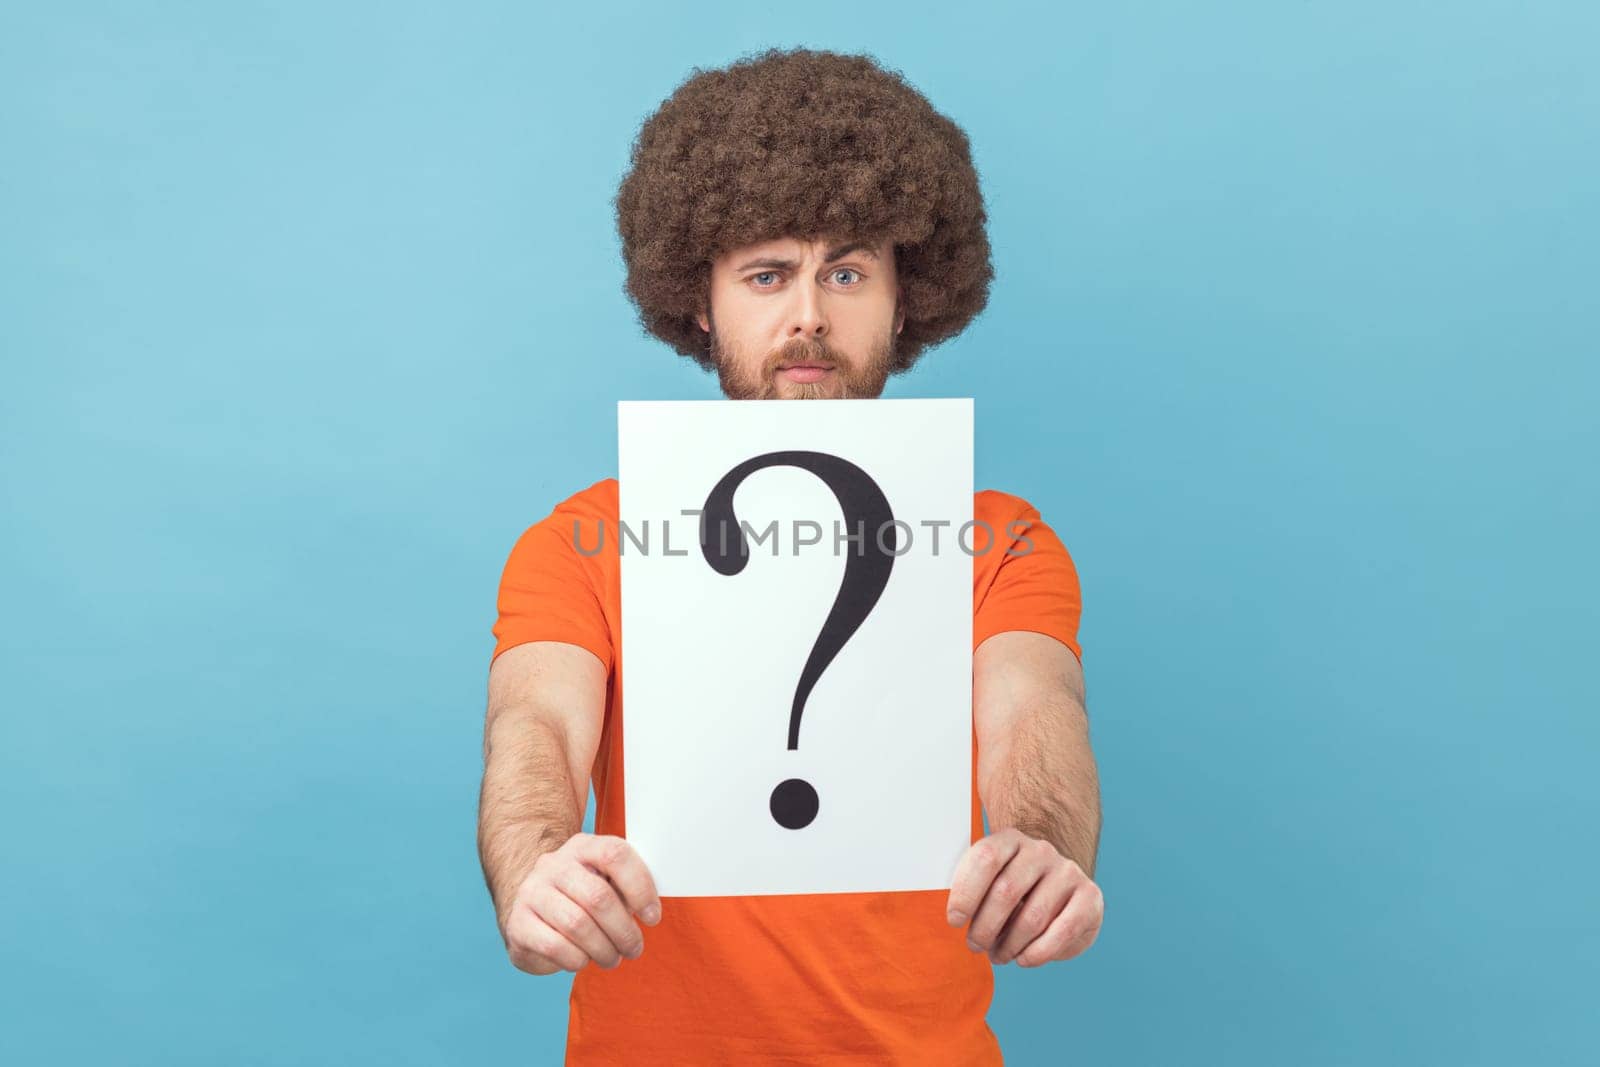 Portrait of man with Afro hairstyle wearing orange T-shirt holding question mark, finding smart solution, asking for advice, looking at camera. Indoor studio shot isolated on blue background.